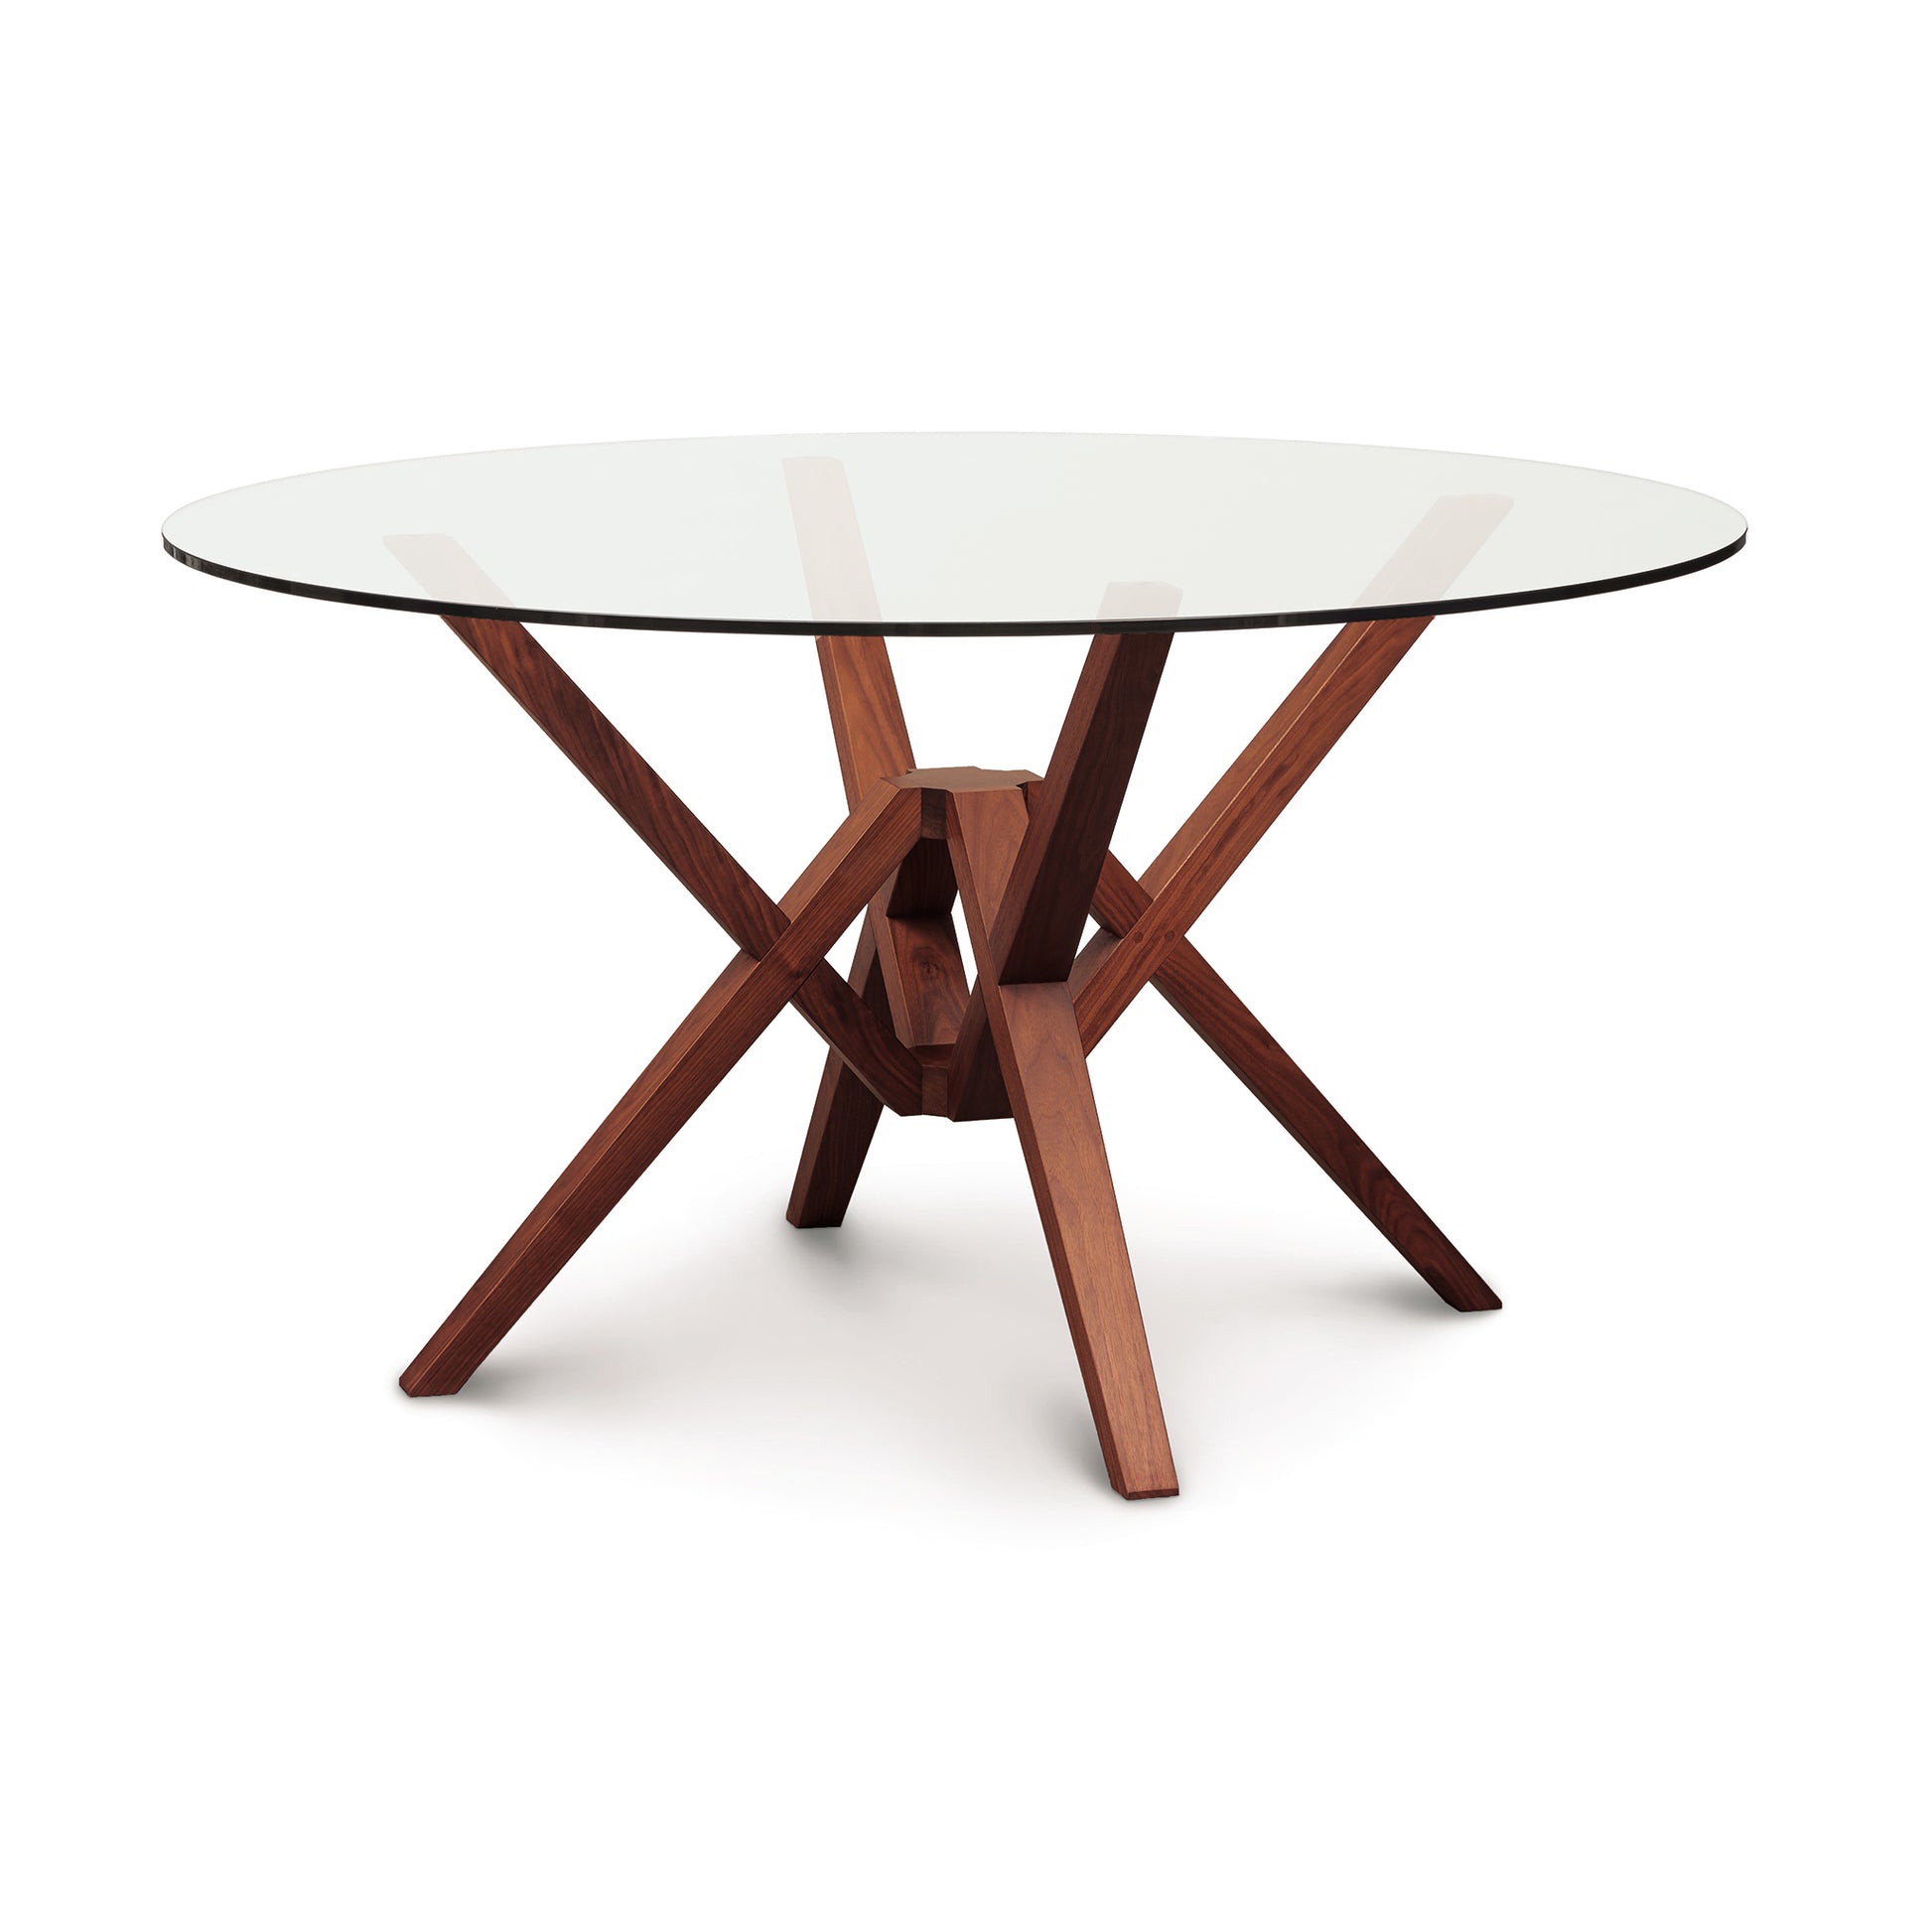 Copeland Furniture's Exeter Round Glass Top Table with a solid wood base crafted from sustainably harvested hardwoods, on a white background.